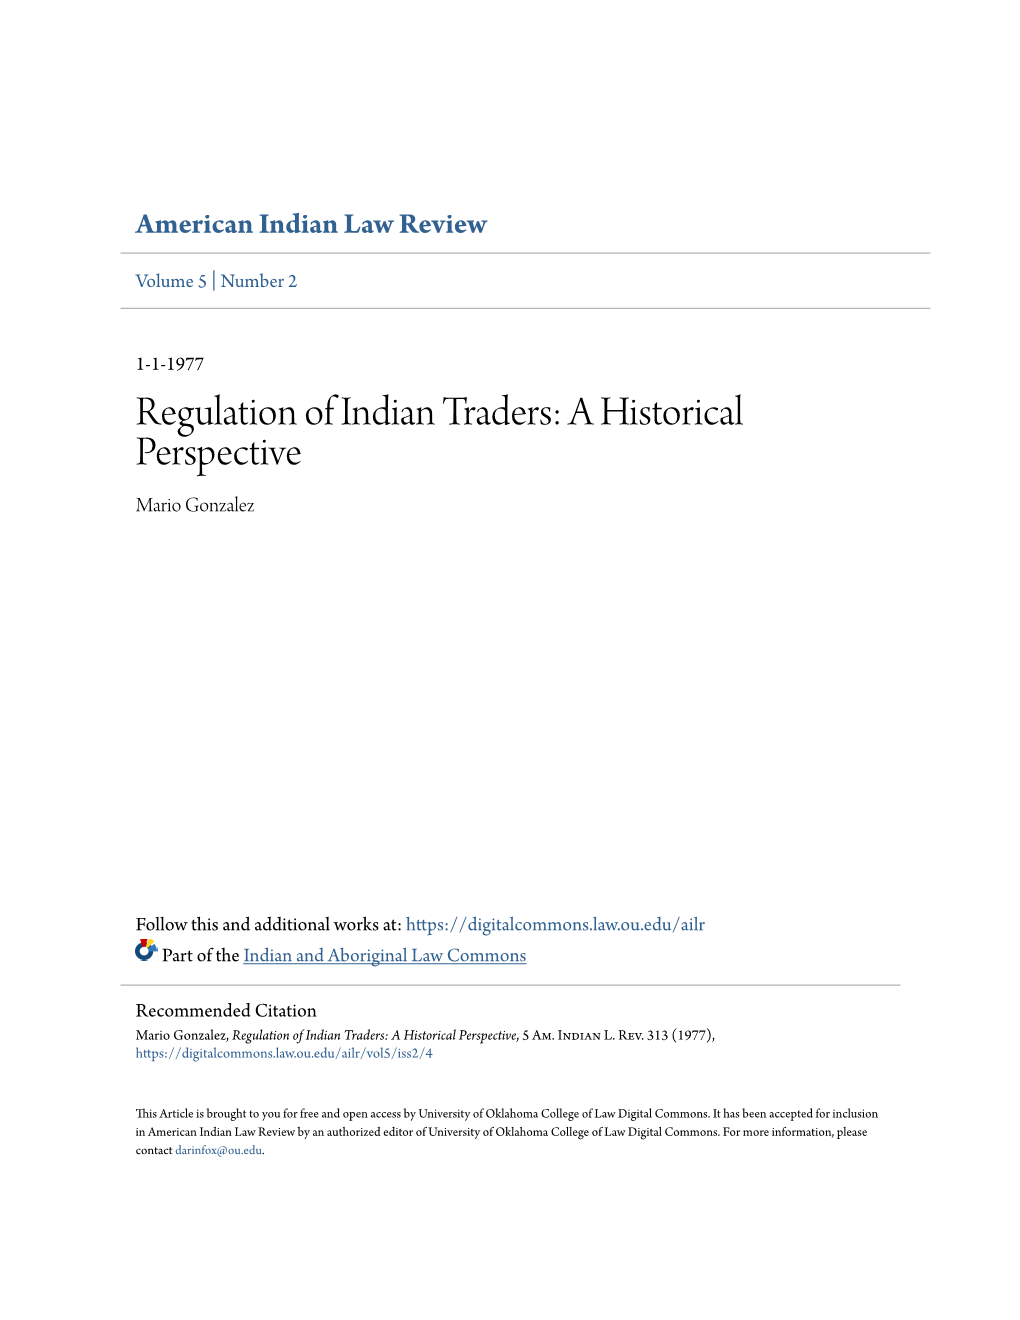 Regulation of Indian Traders: a Historical Perspective Mario Gonzalez